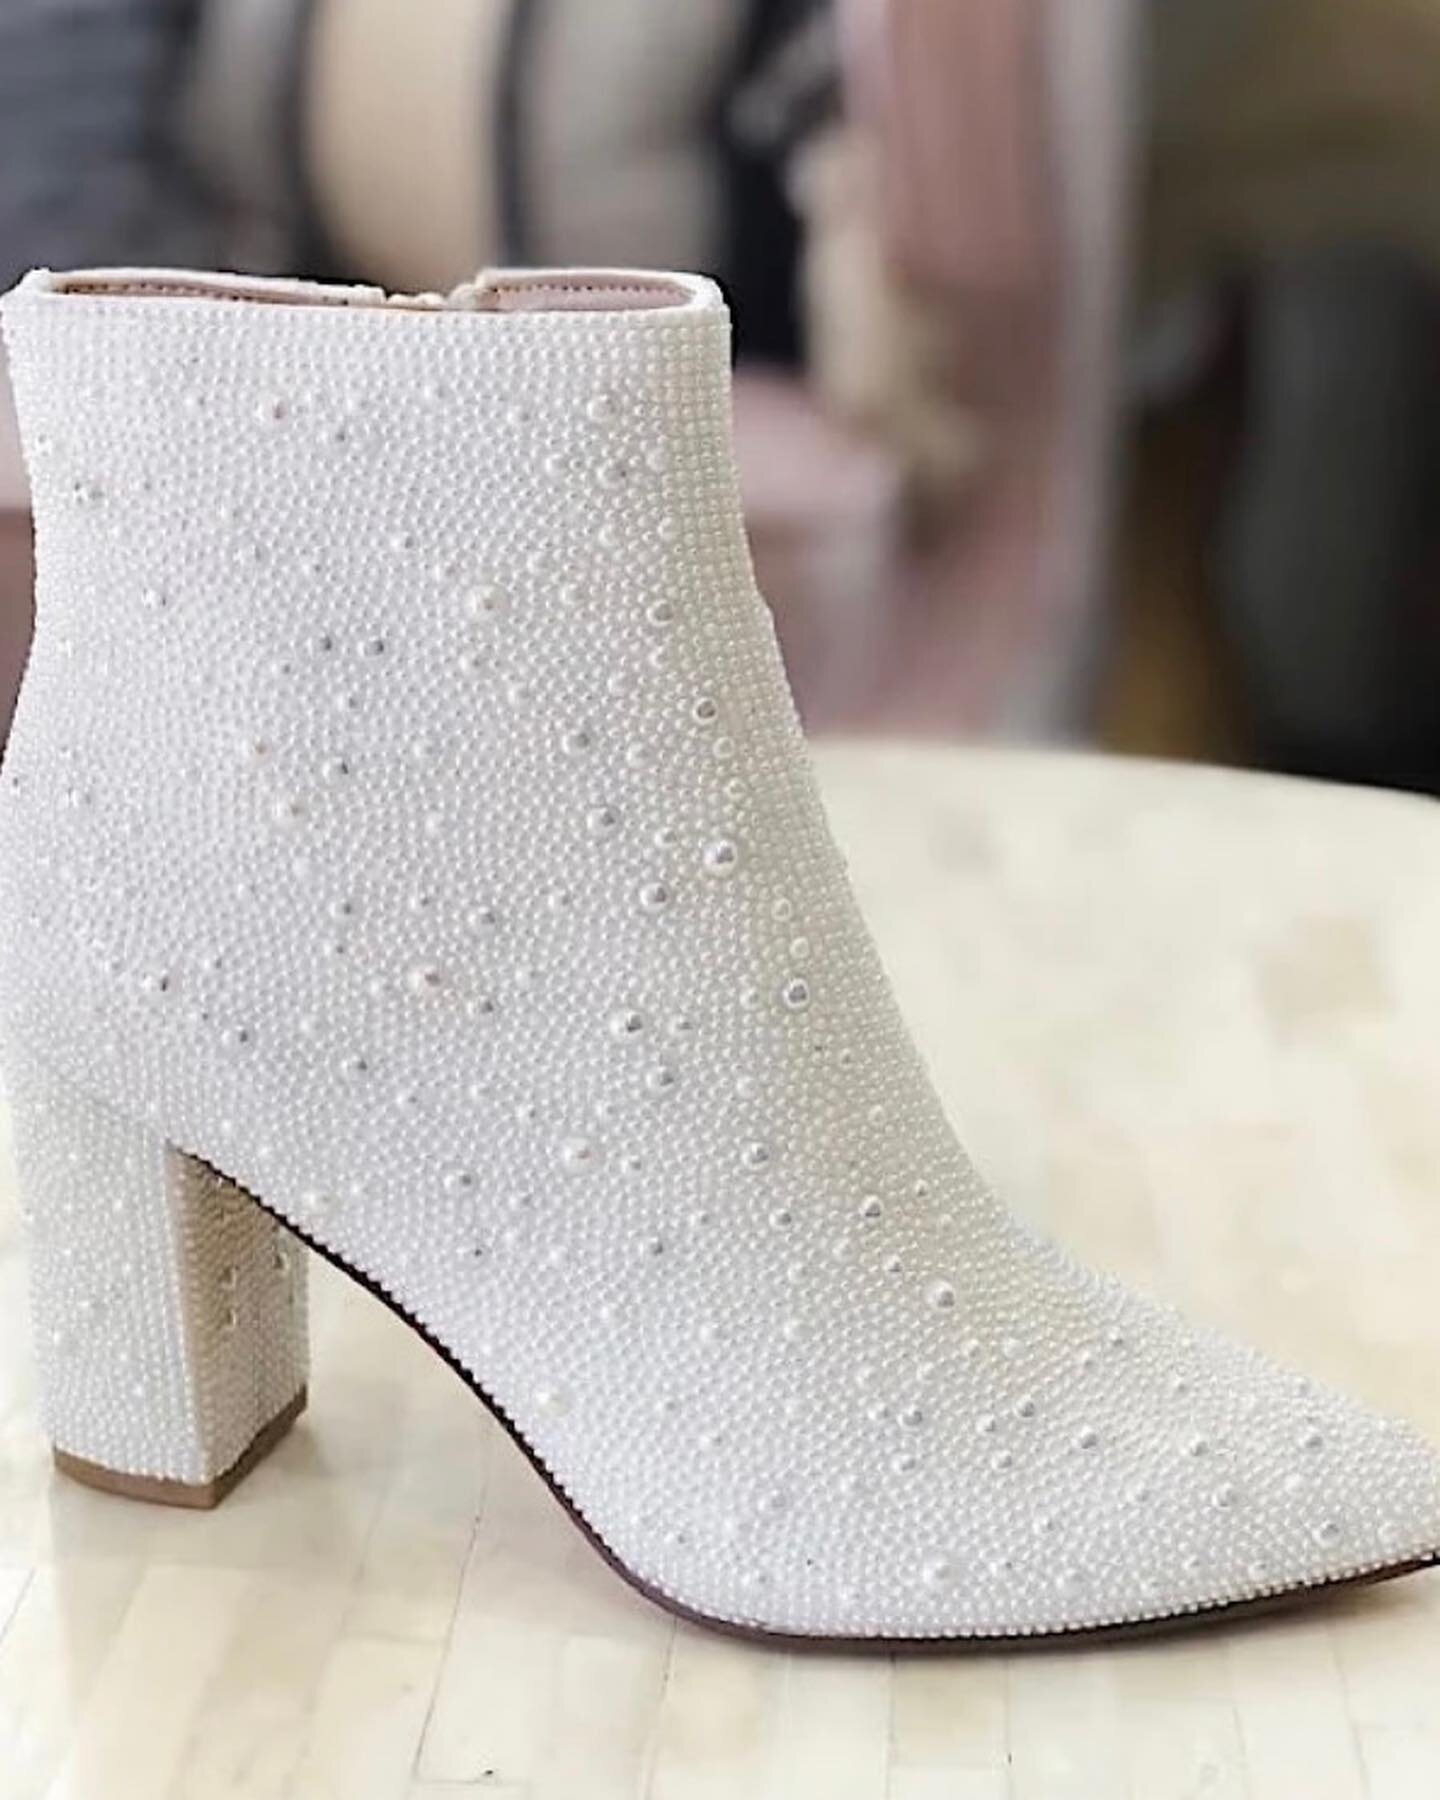 Item of the Week!!!! 
These beauties just arrived. They are even prettier in person. Spice up your outfit with these eye catching booties. 

https://www.lsfboutique.com/shop/p/white-pearl-bootie